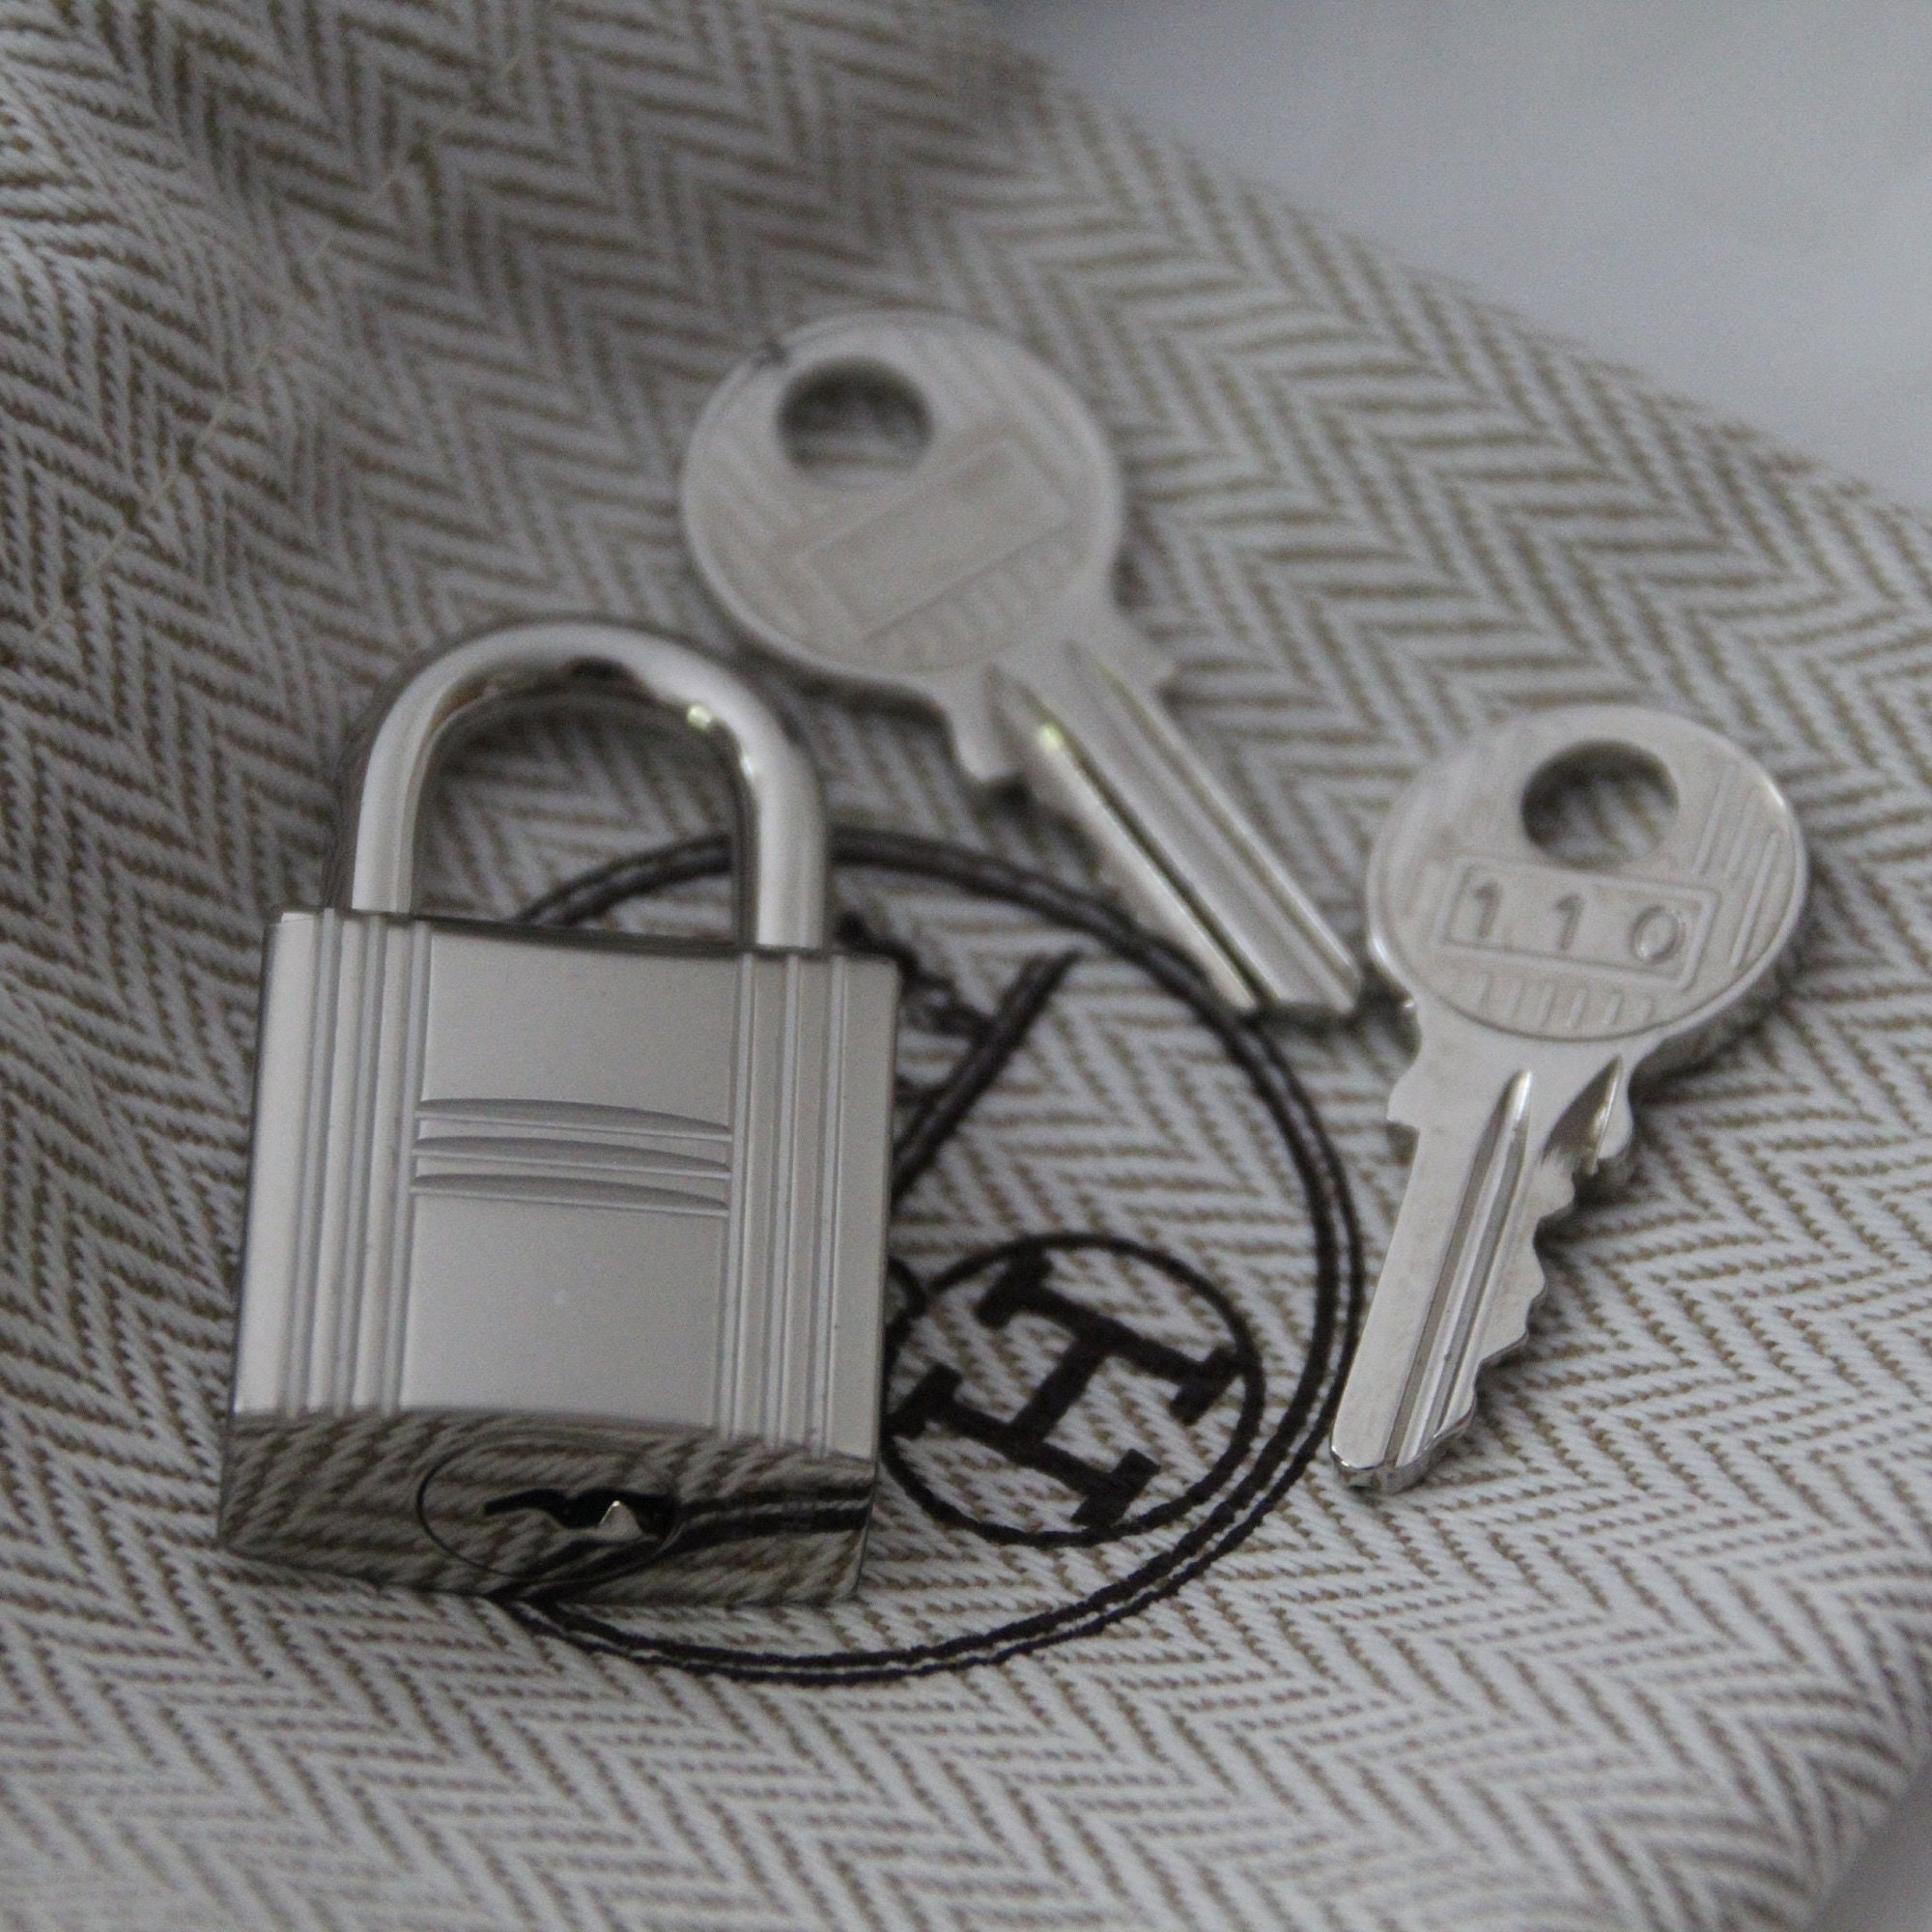 A Kelly 40 bag of camel coloured Fjord leather with golden hardware, keys  and padlock by Hermès (Co.) on artnet